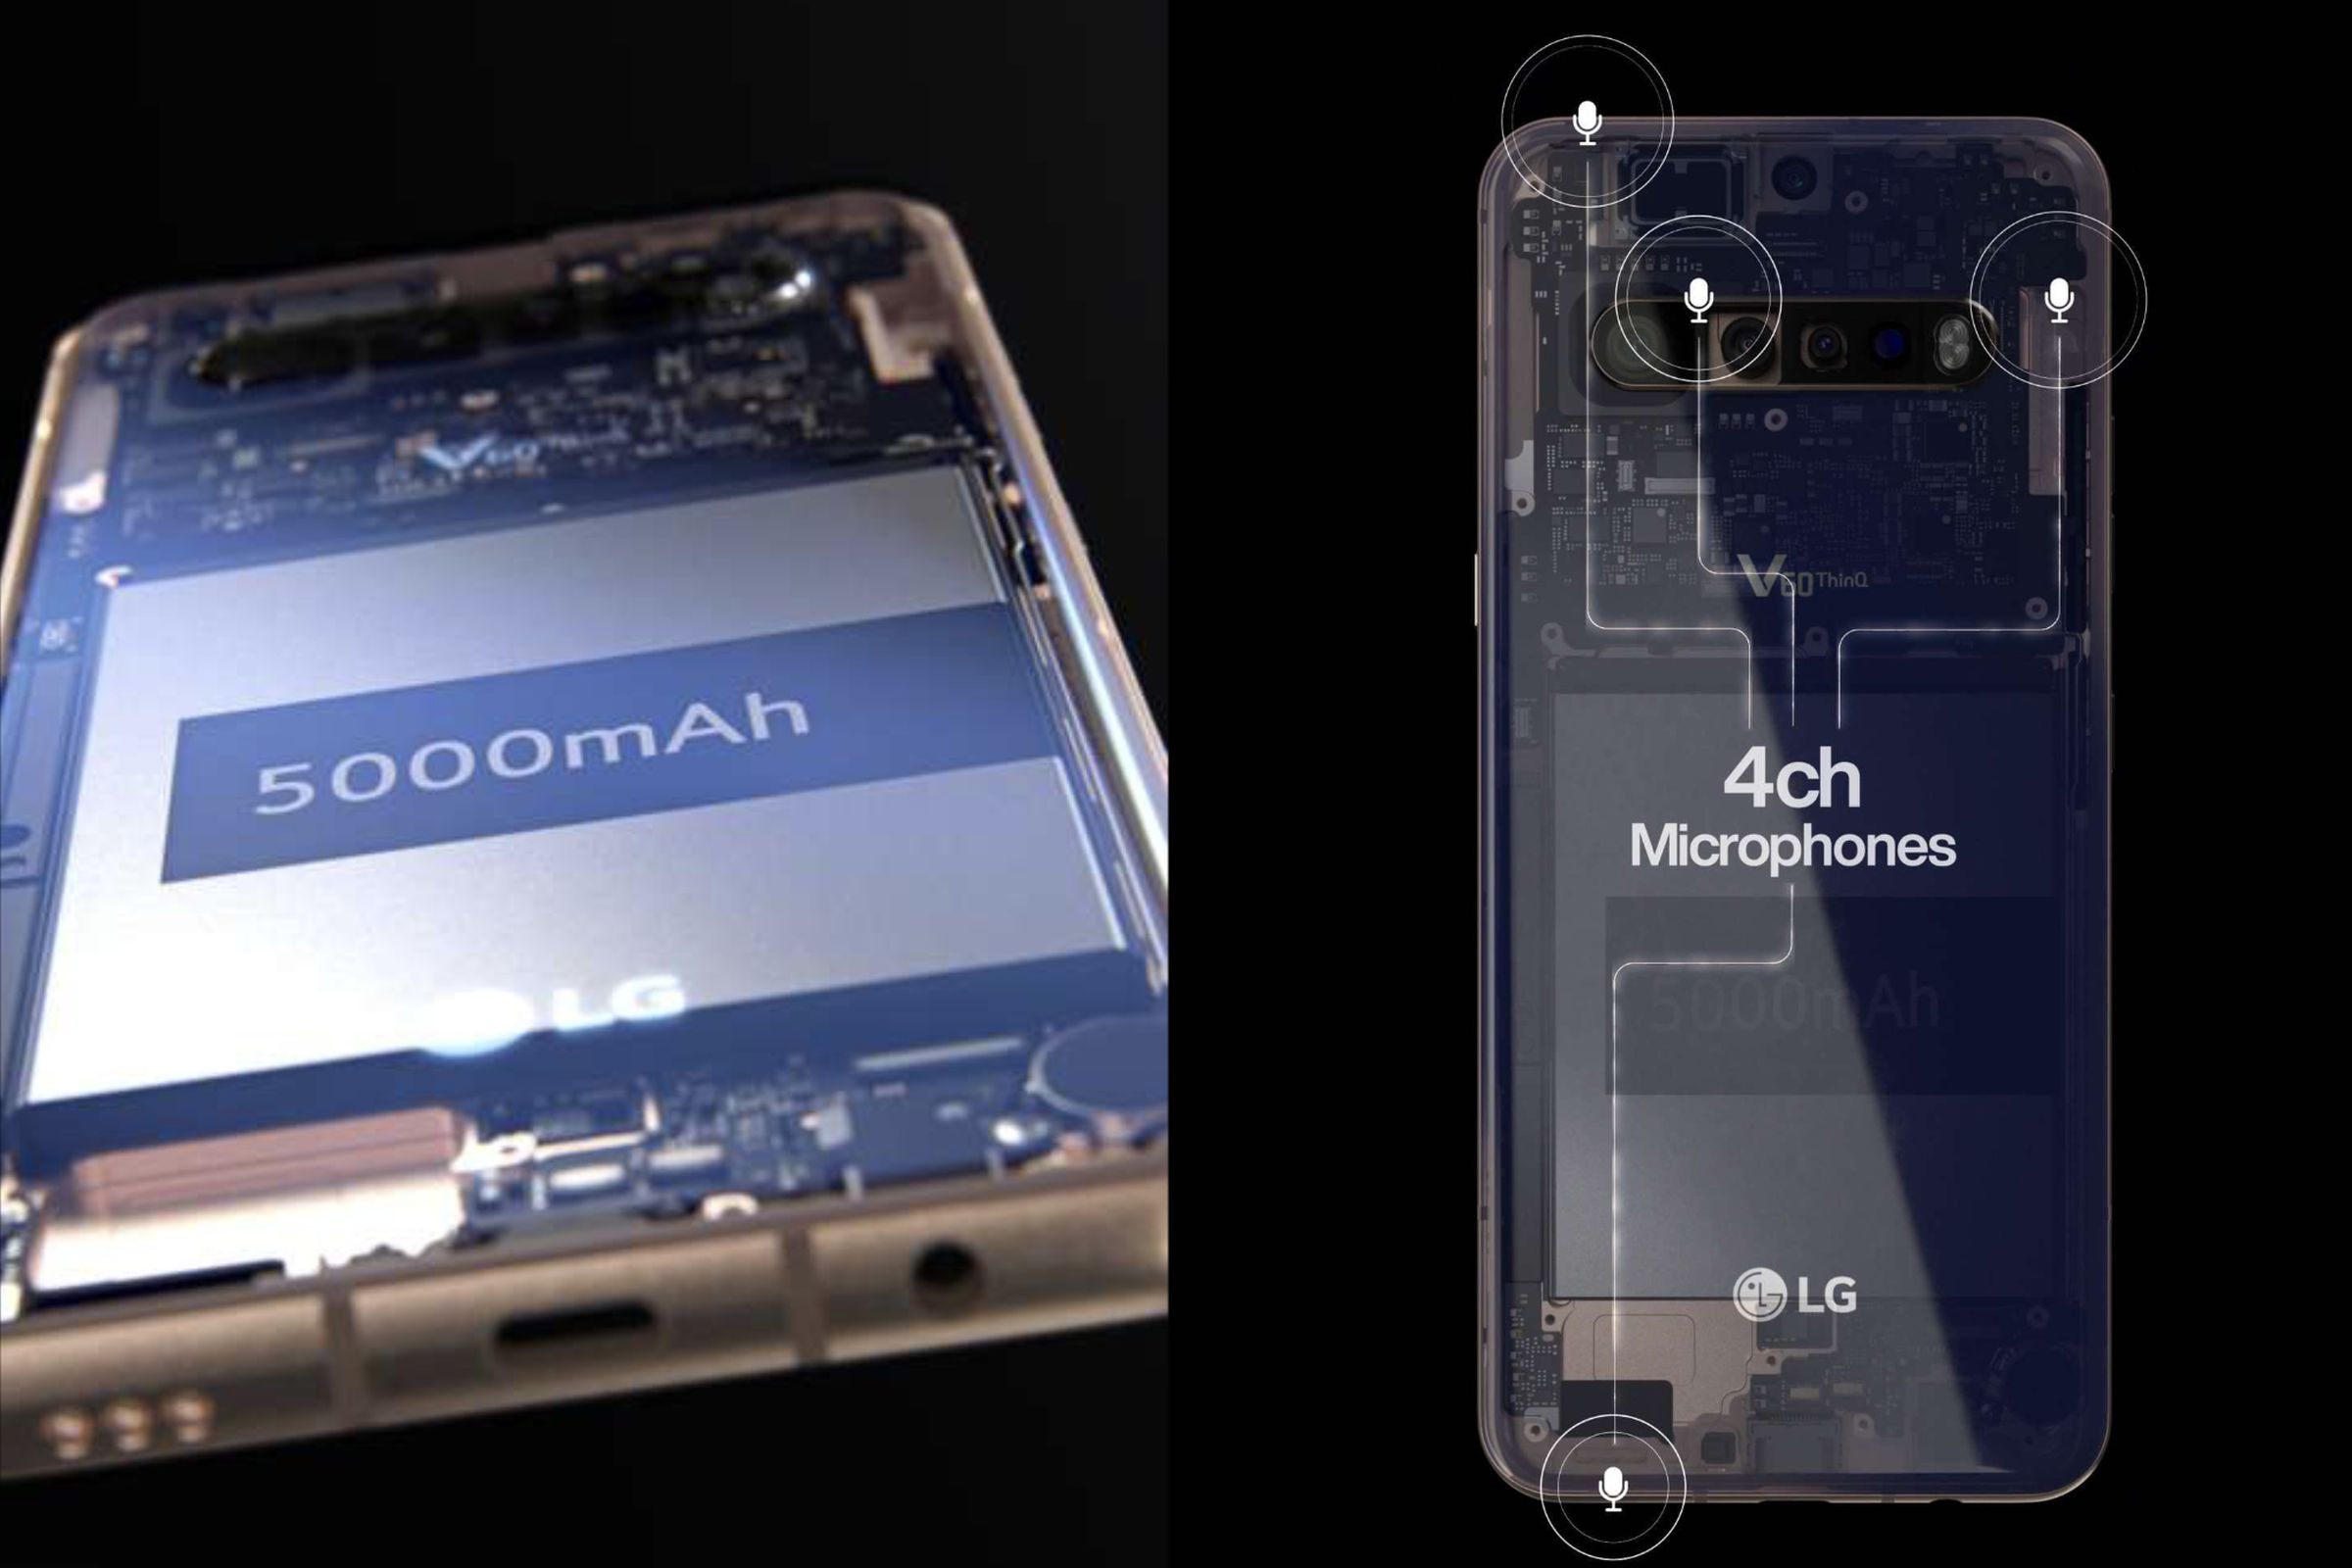 A previous leak claimed the phone would have a 5,000mAh battery and four microphones.